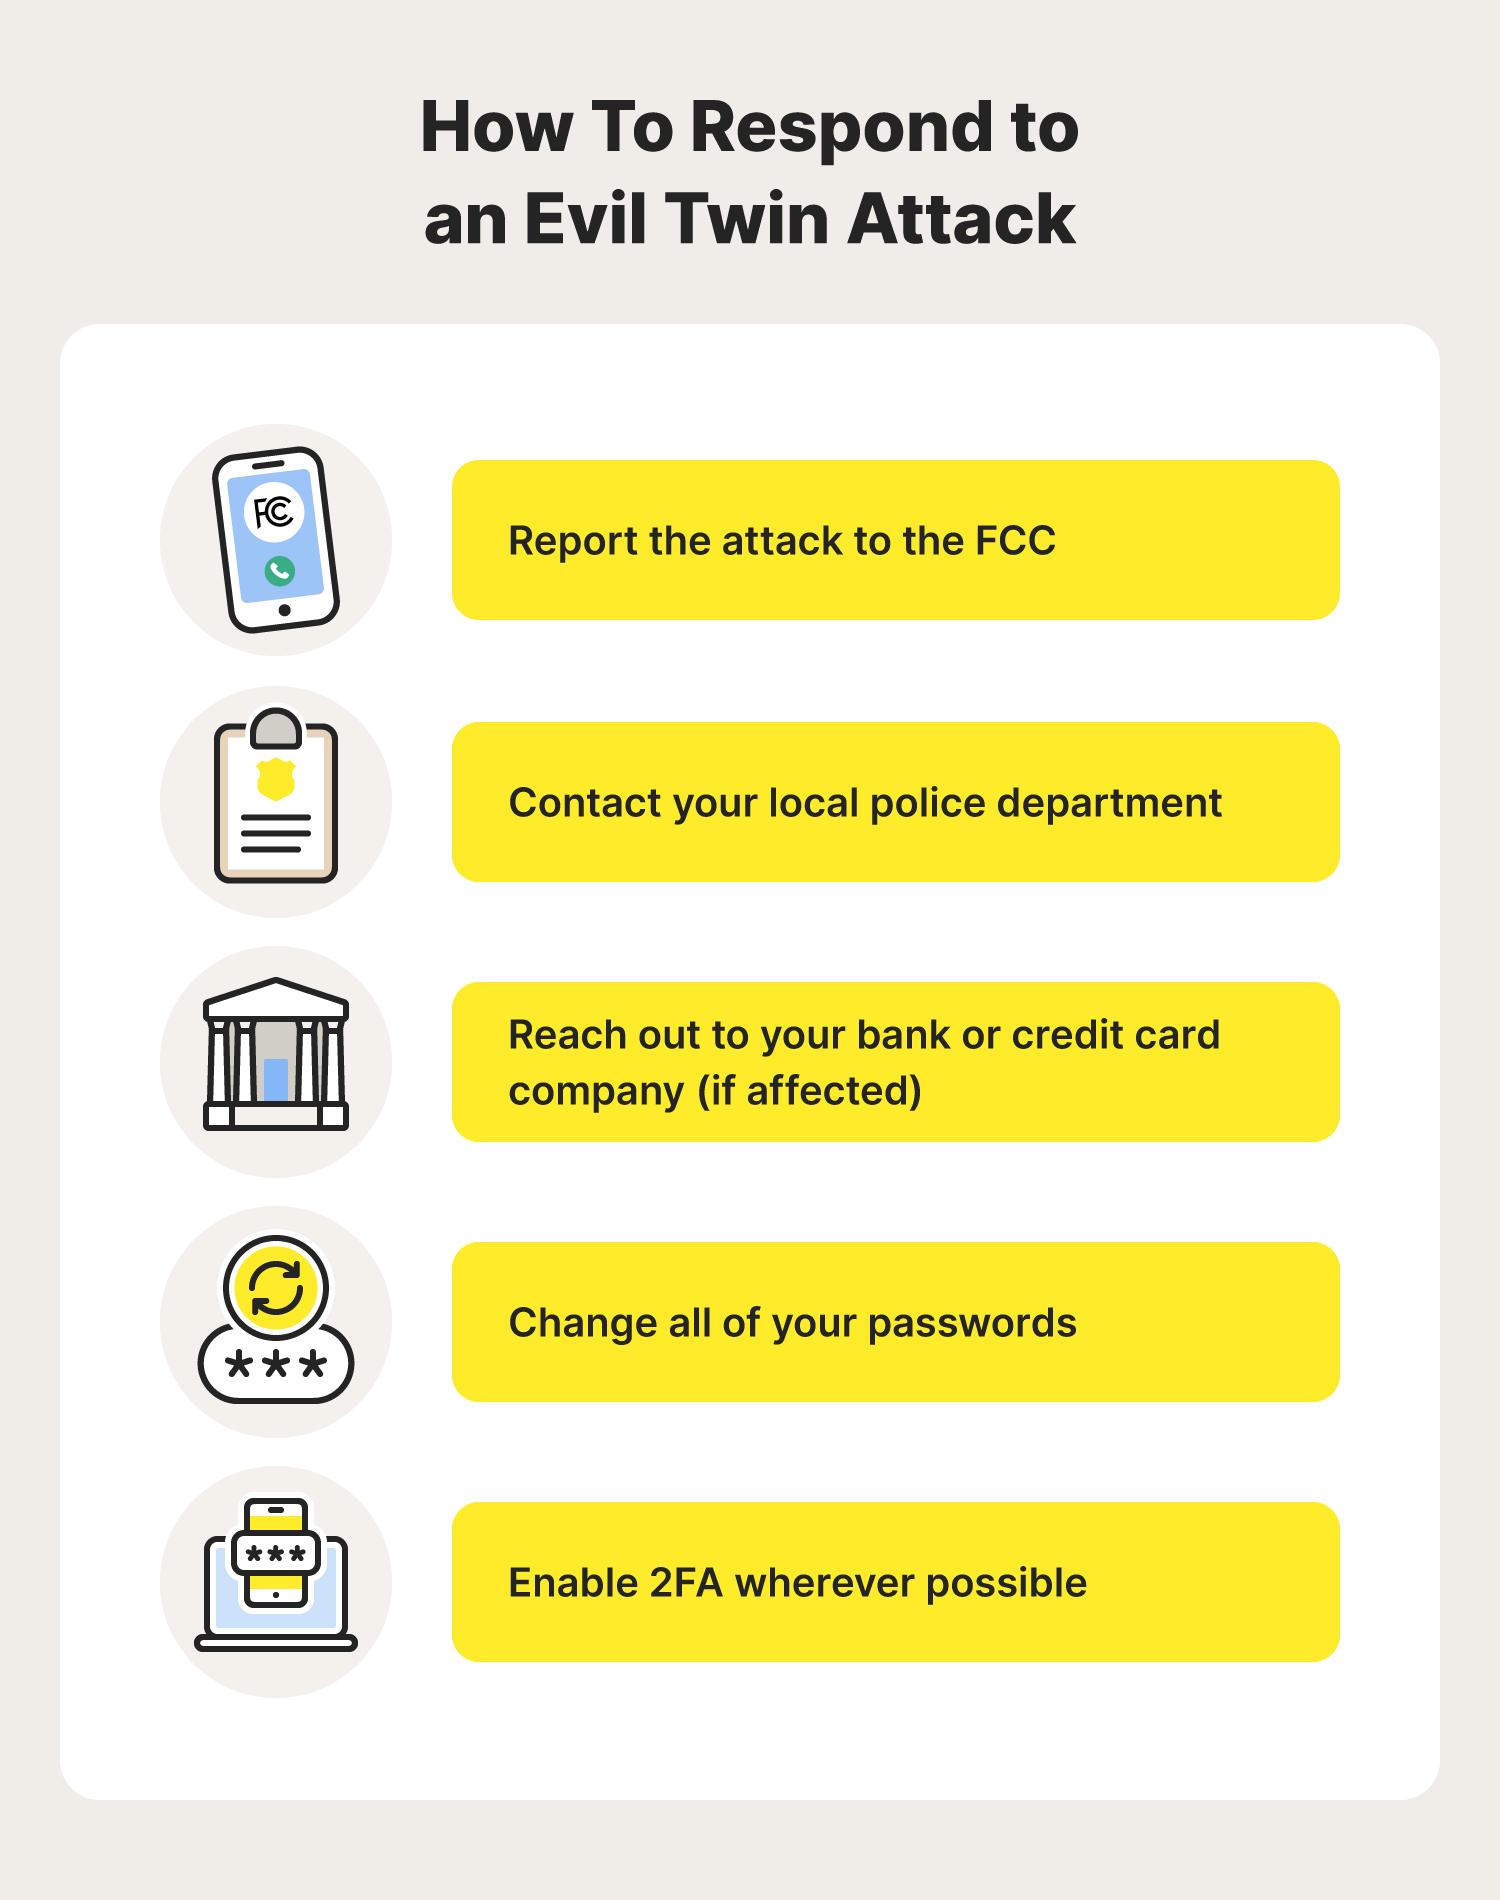 A graphic includes the steps one can take to respond to an evil twin attack.